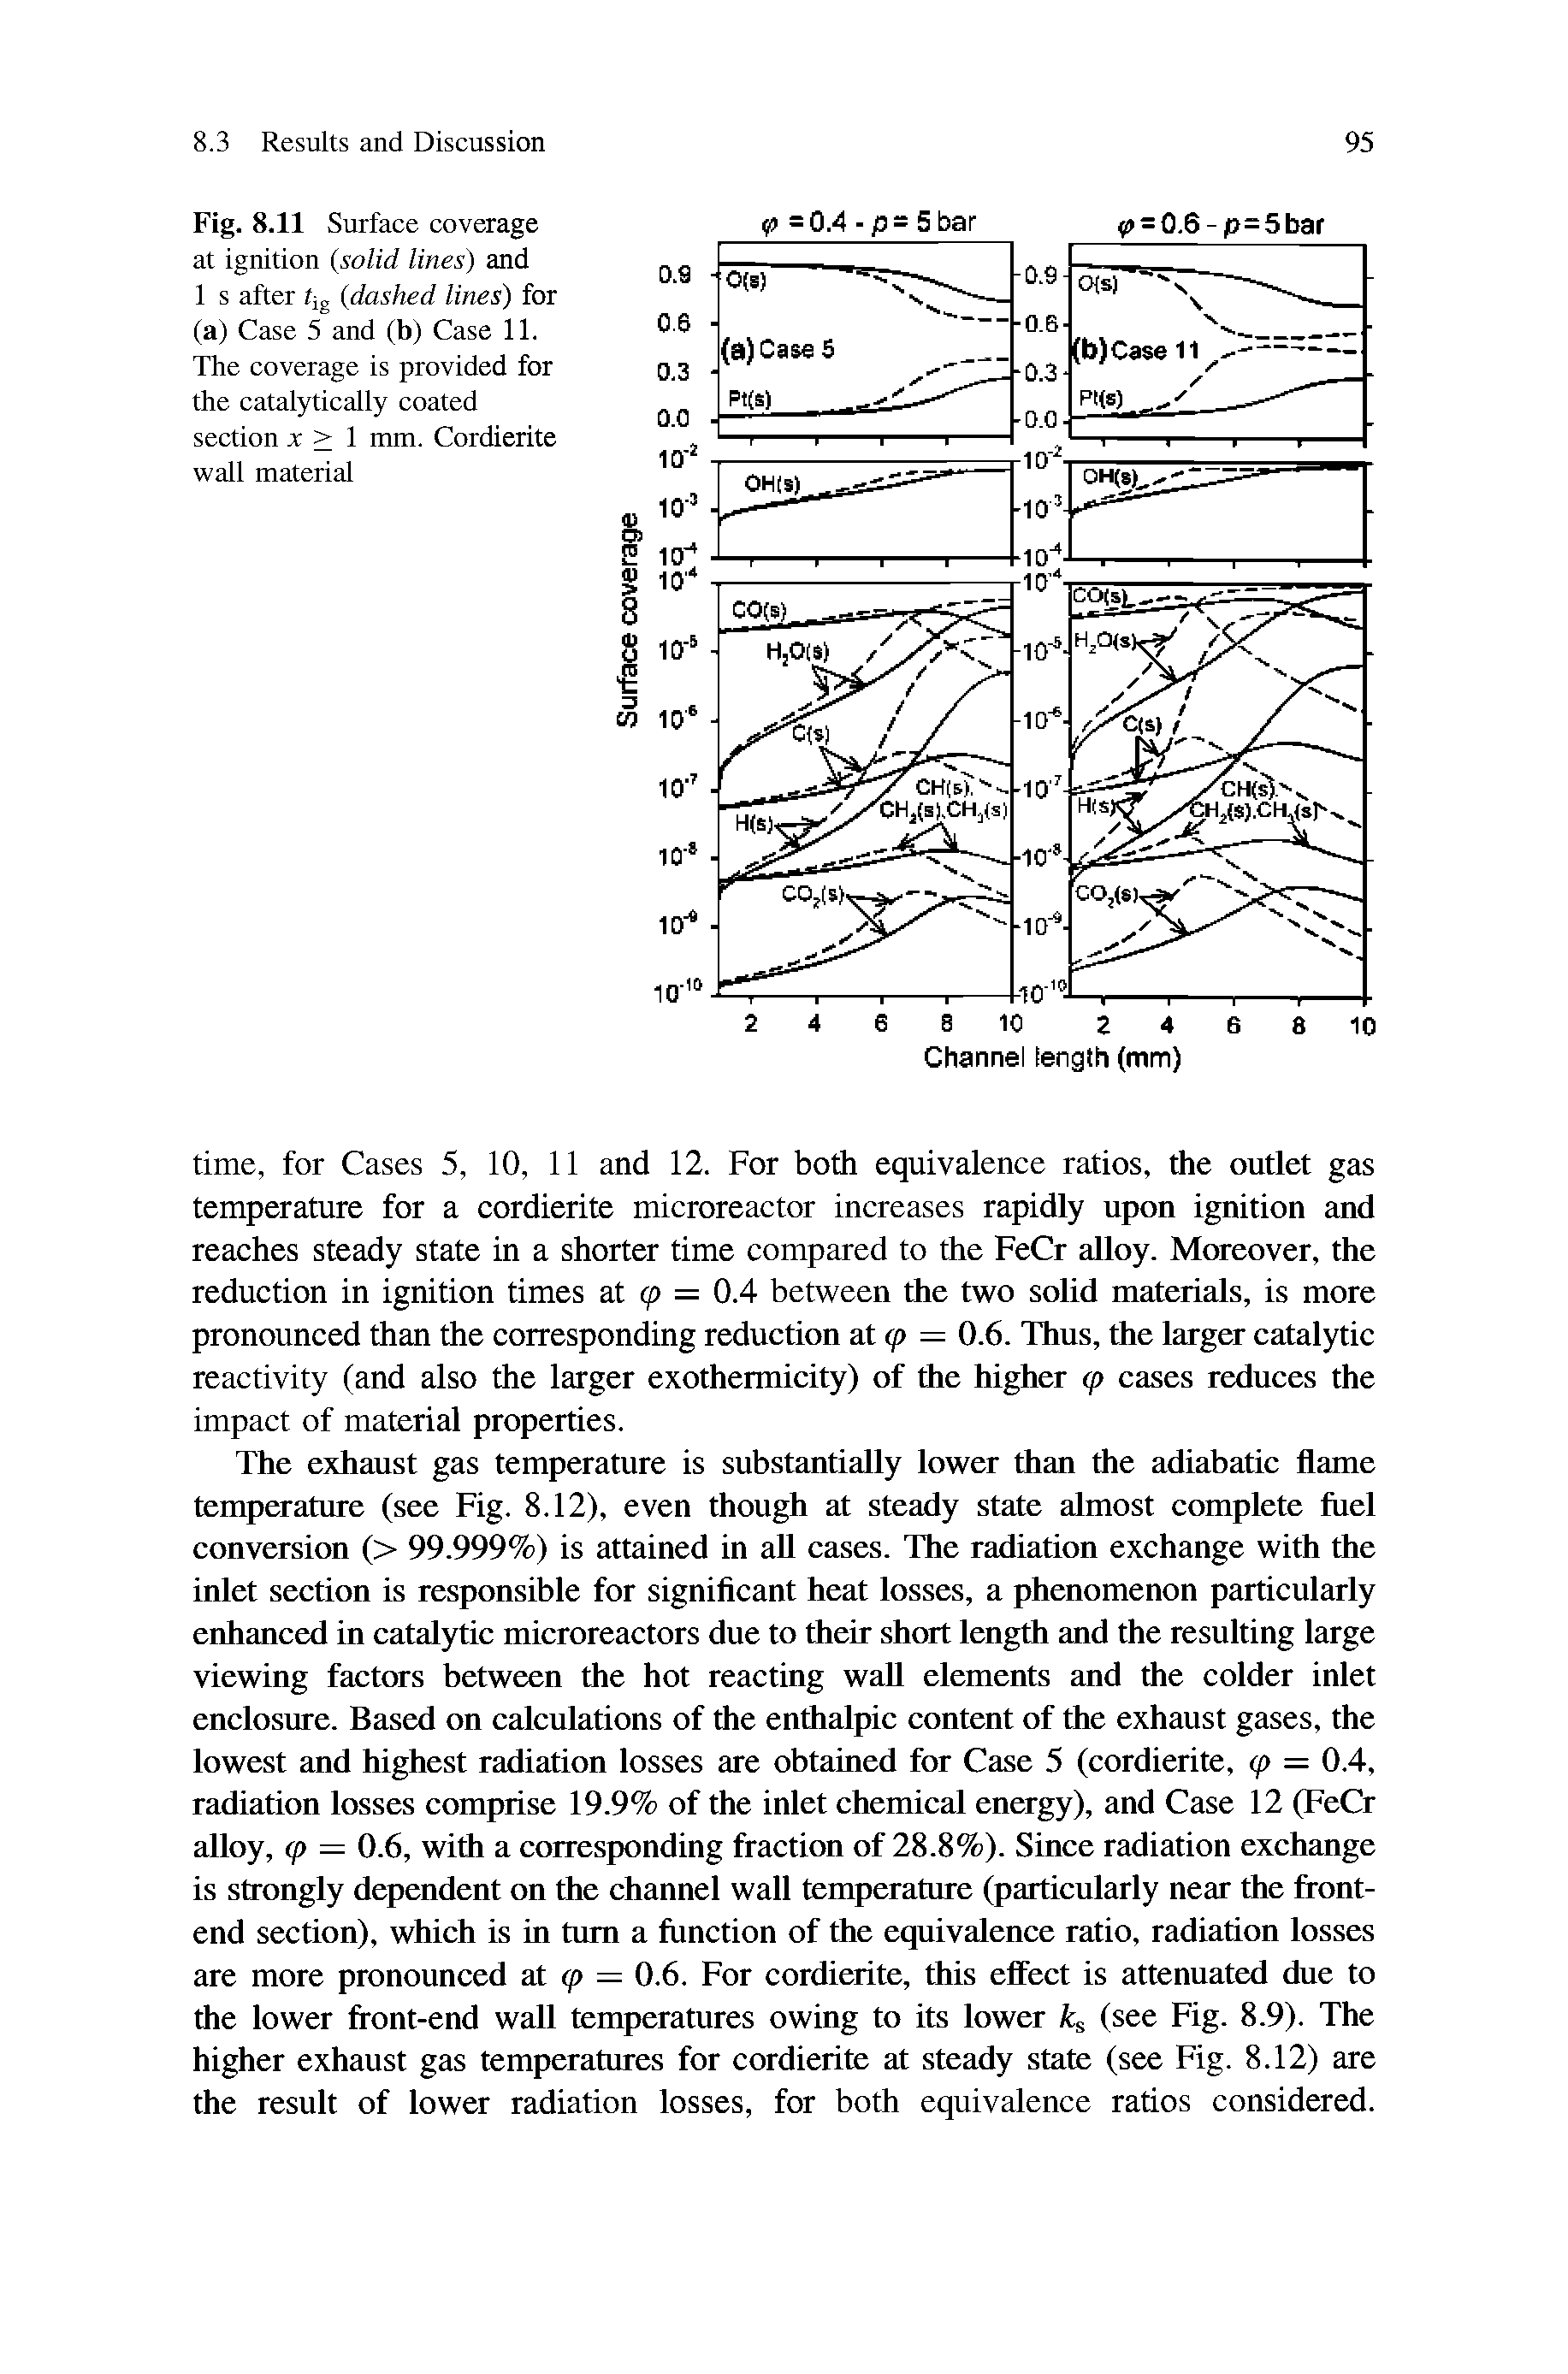 Fig. 8.11 Surface coverage at ignition (solid lines) and 1 s after tjg (dashed lines) for (a) Case 5 and (b) Case 11. The coverage is provided for the catalytically coated section x > I mm. Cordierite wall material...